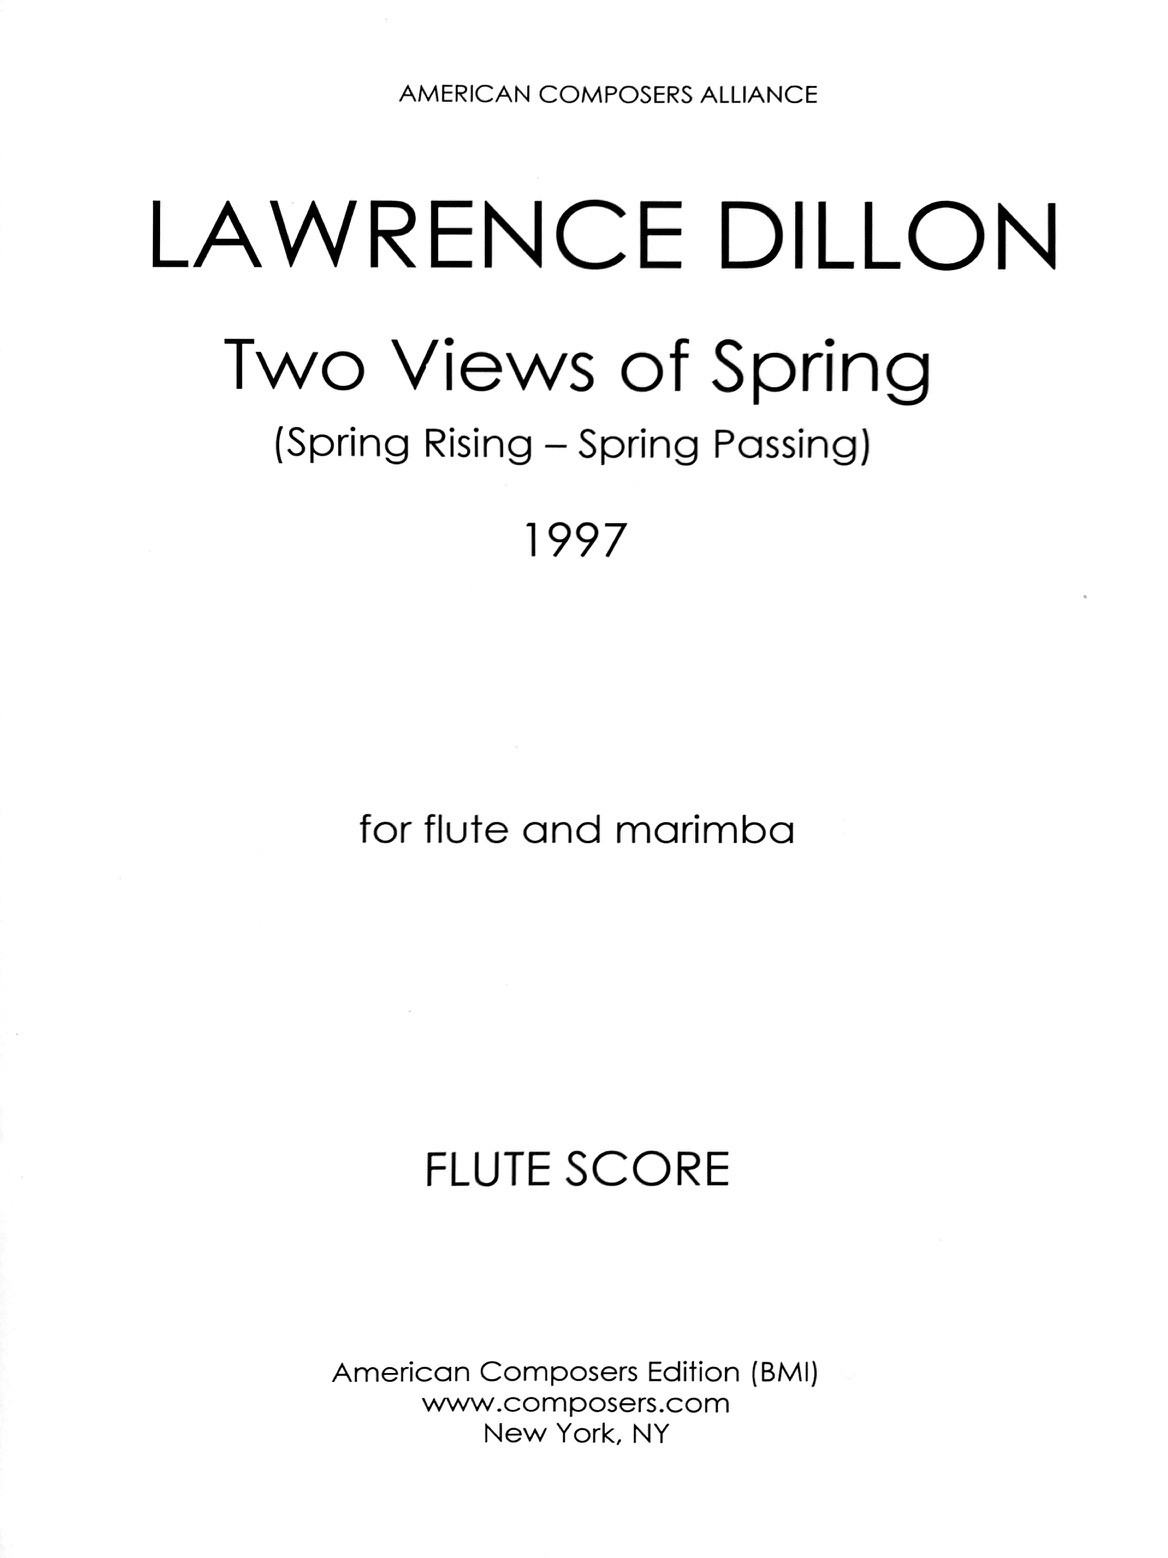 Dillon, L :: Two Views of Spring